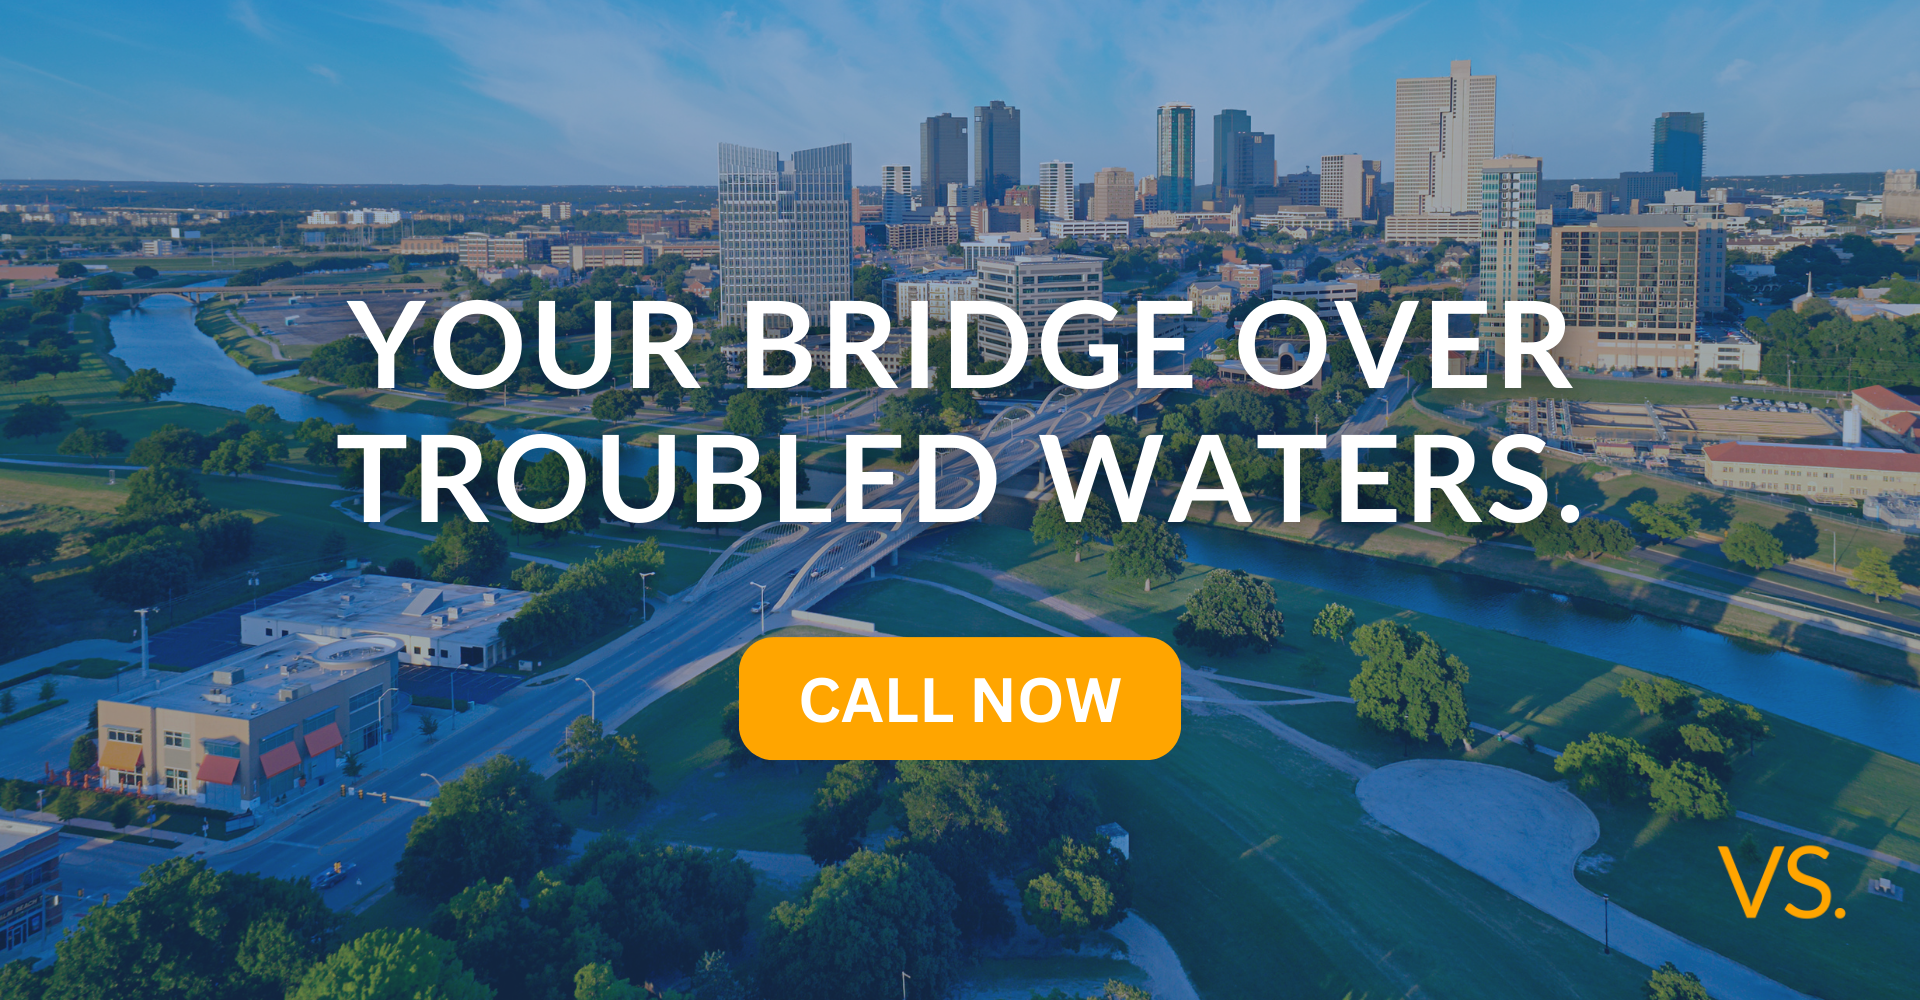 Our lawyers are your bridge over troubled waters.